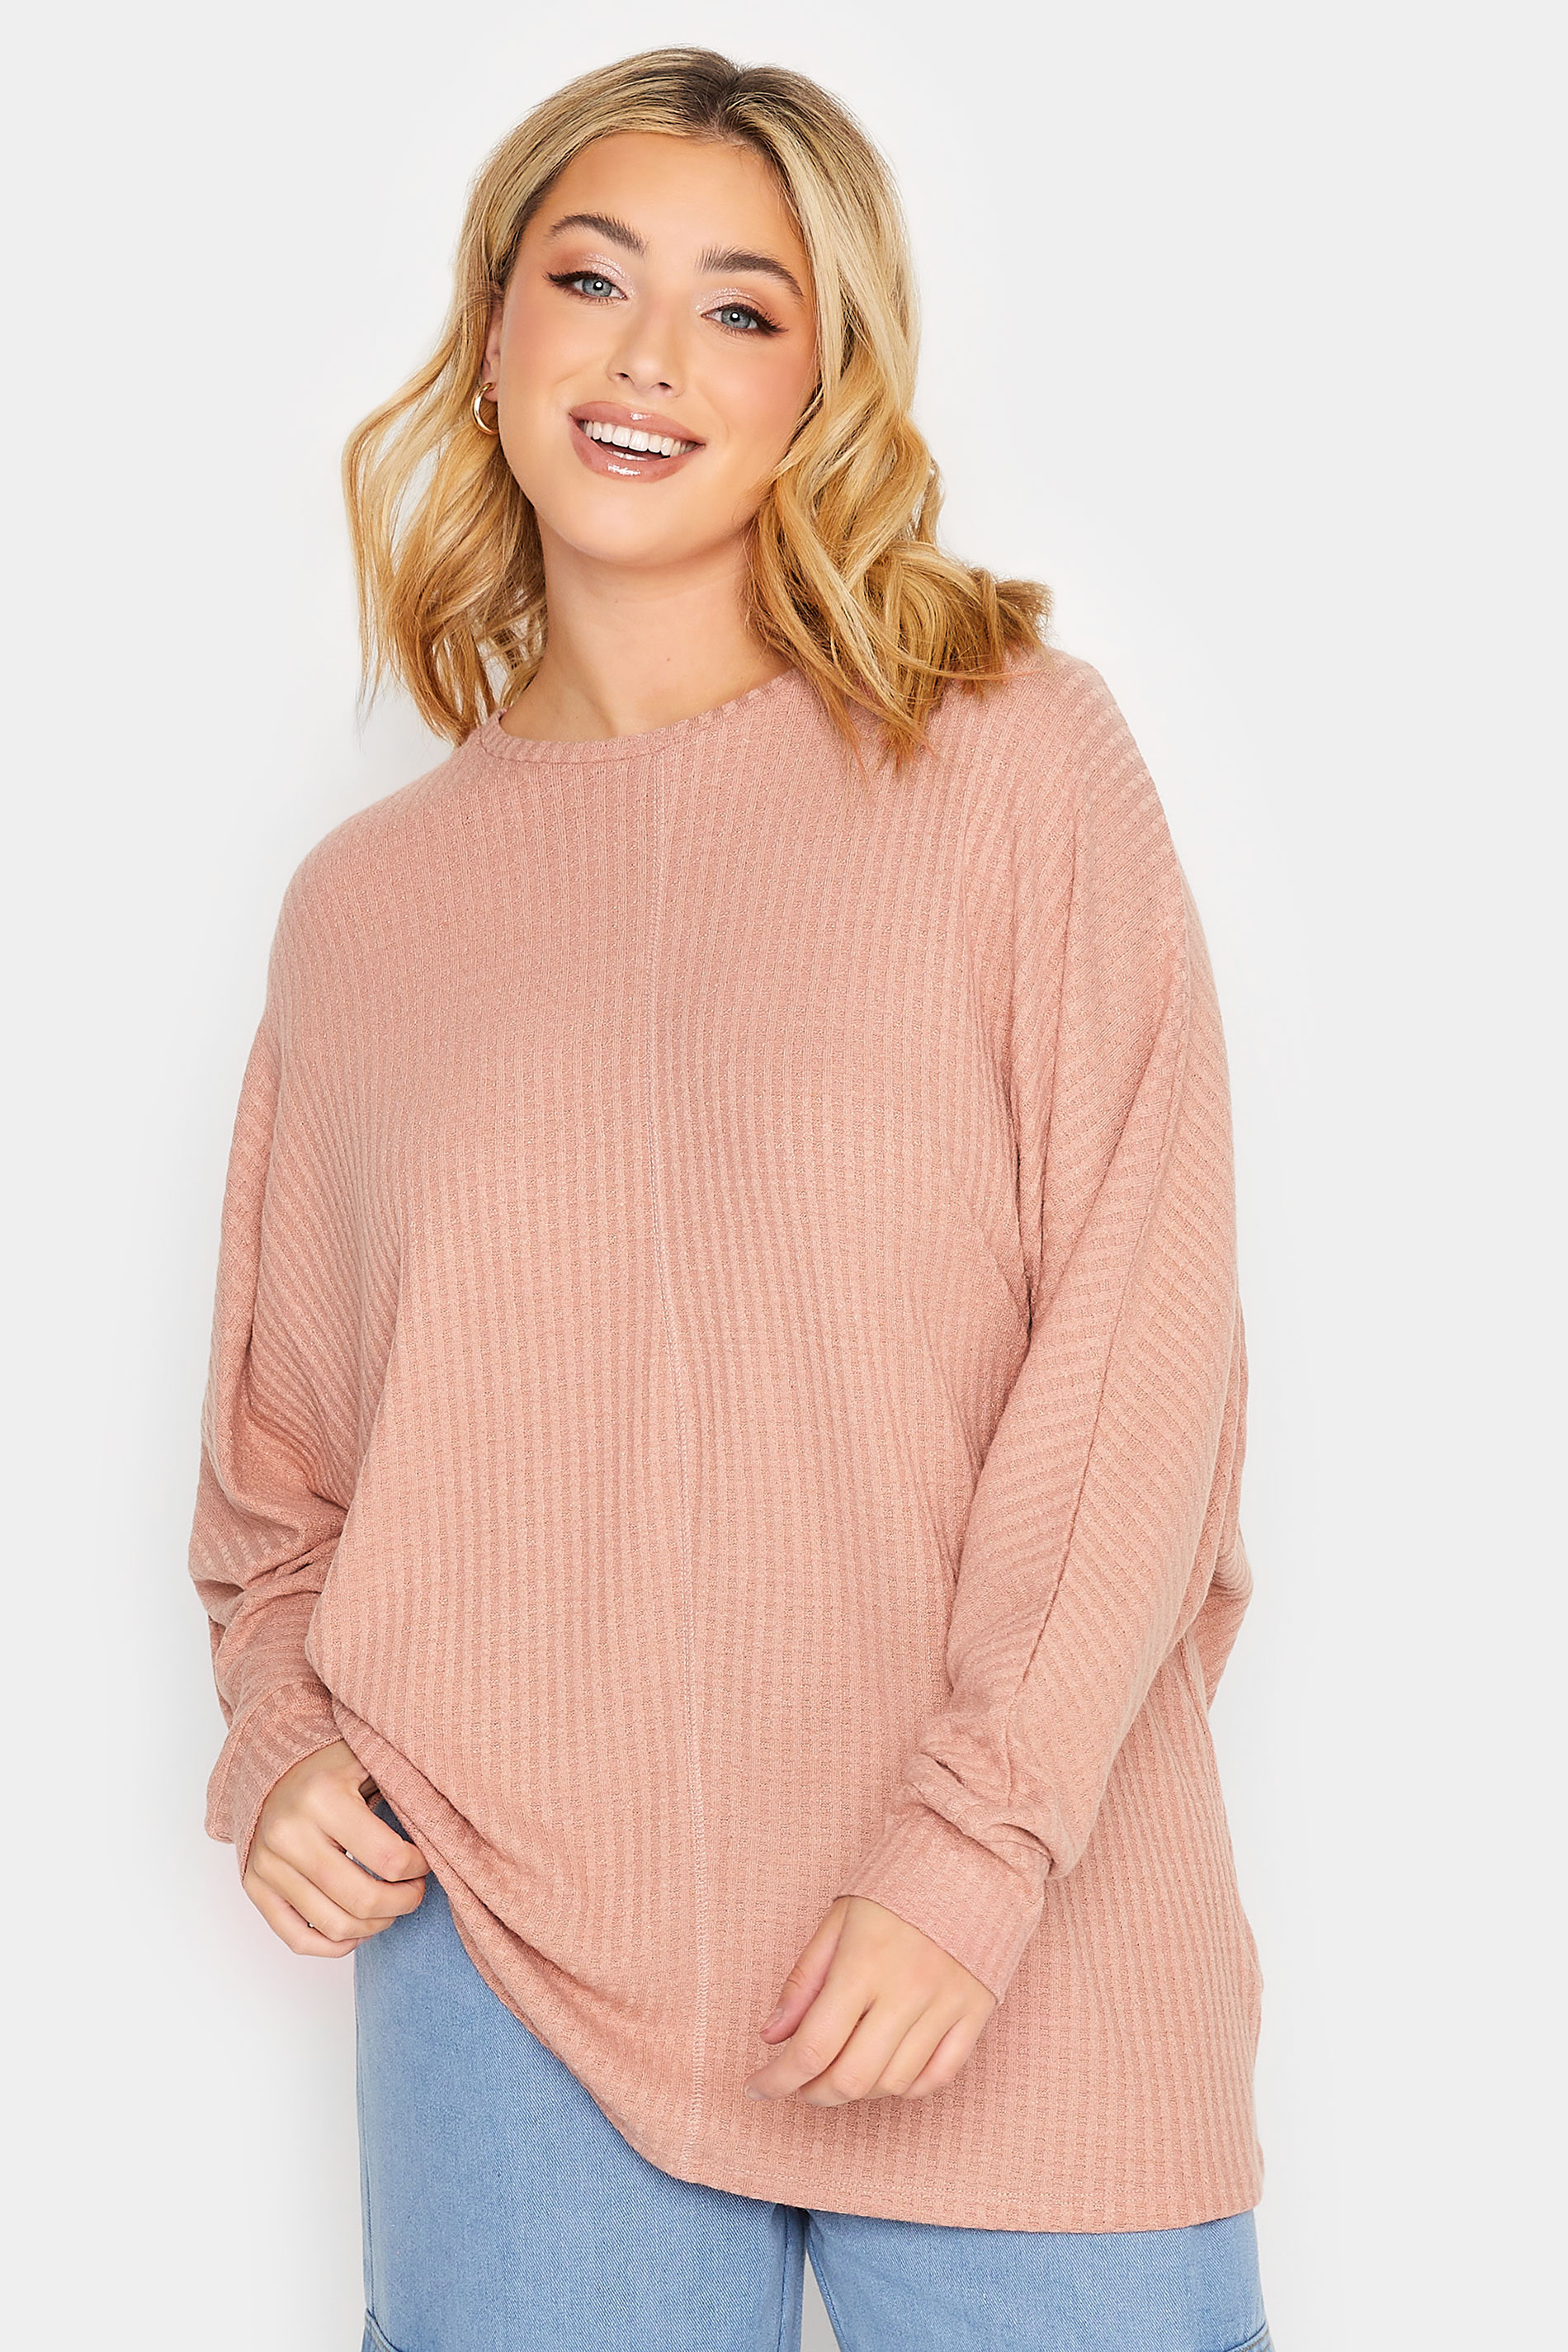 YOURS Plus Size Pink Soft Touch Ribbed Top | Yours Clothing 1